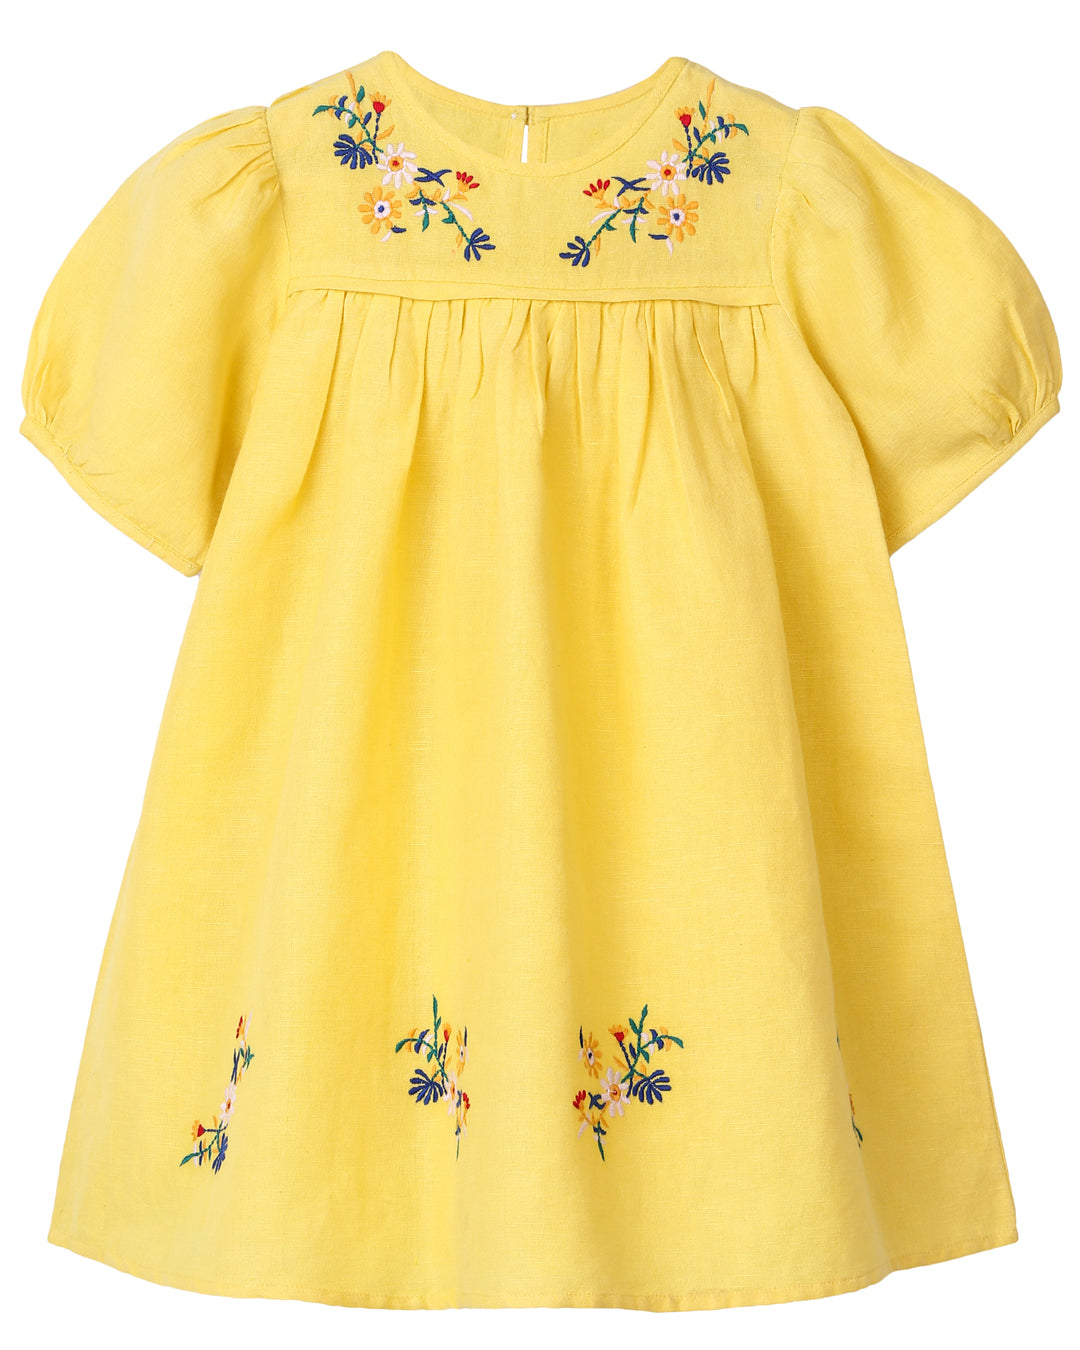 LINEN DRESS IN A VIBRANT YELLOW